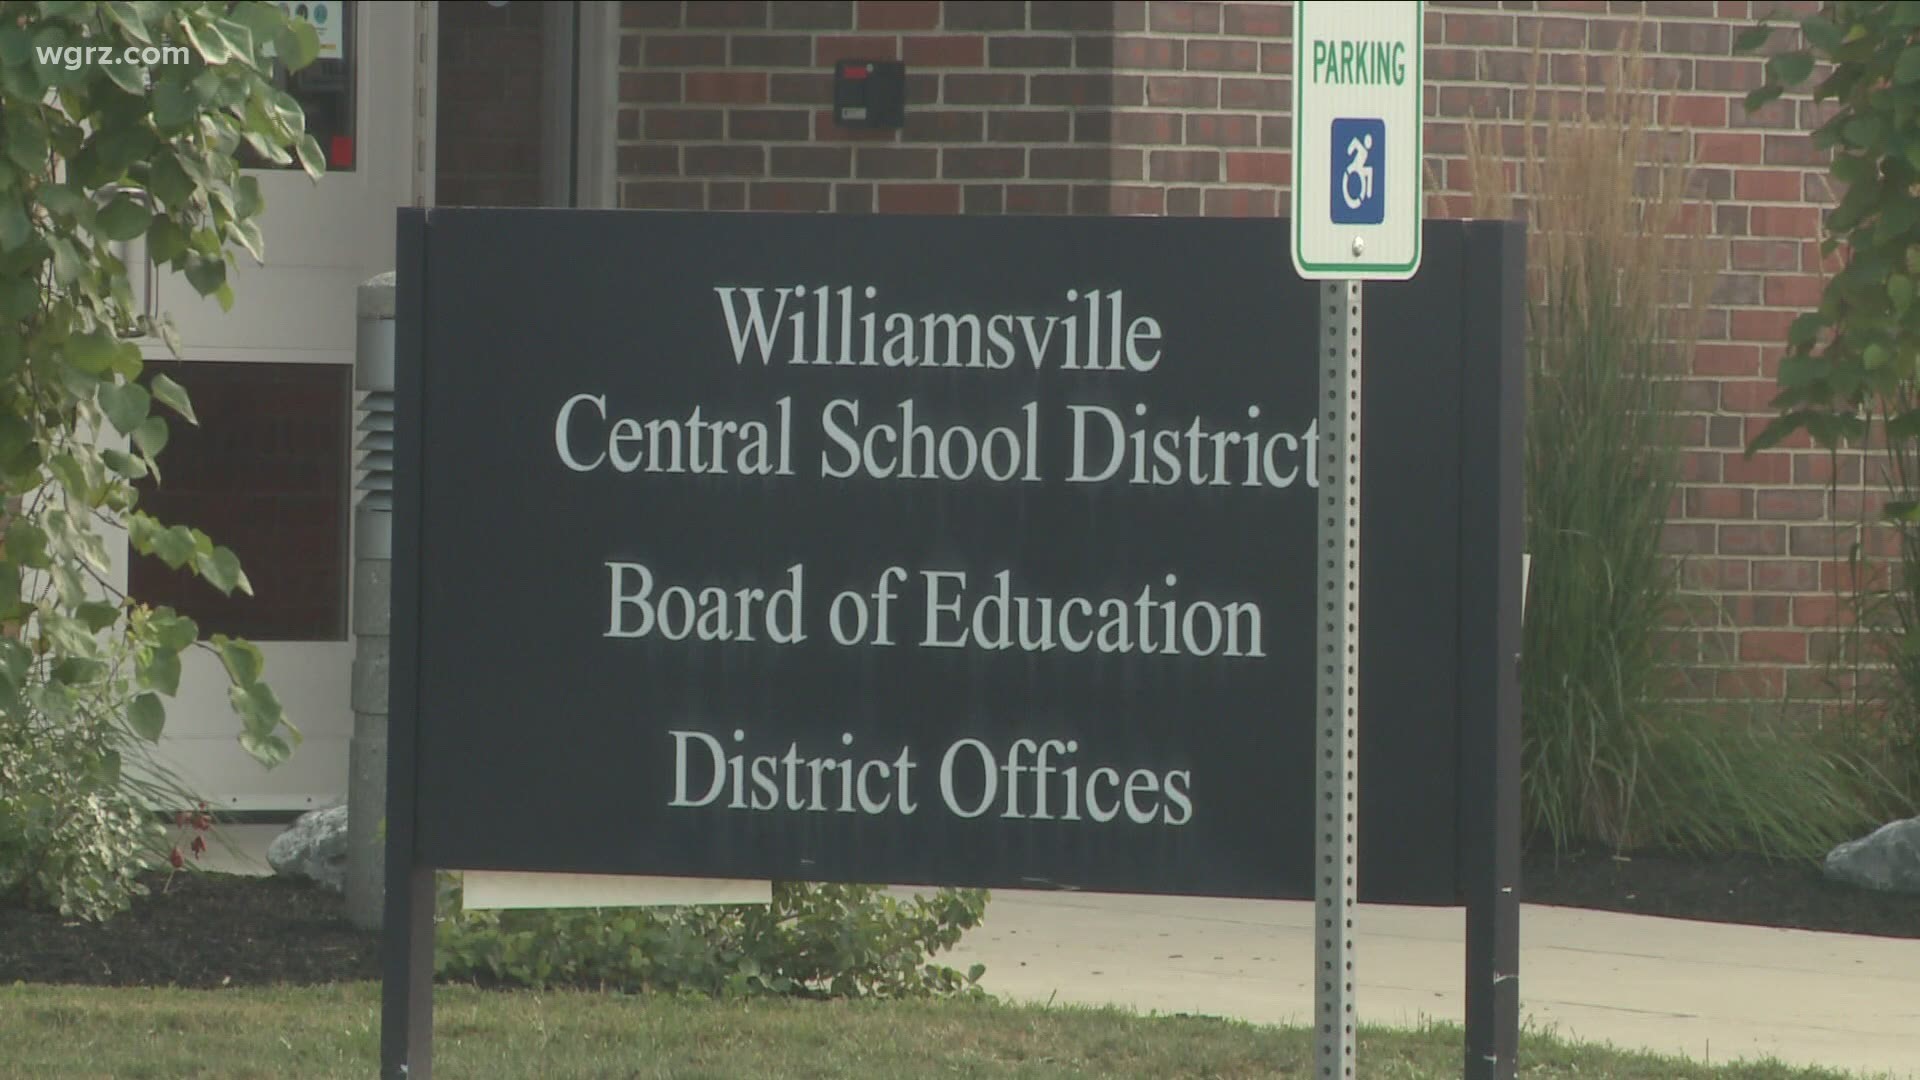 We want to remind parents in Williamsville that tomorrow is the district's board of education election.